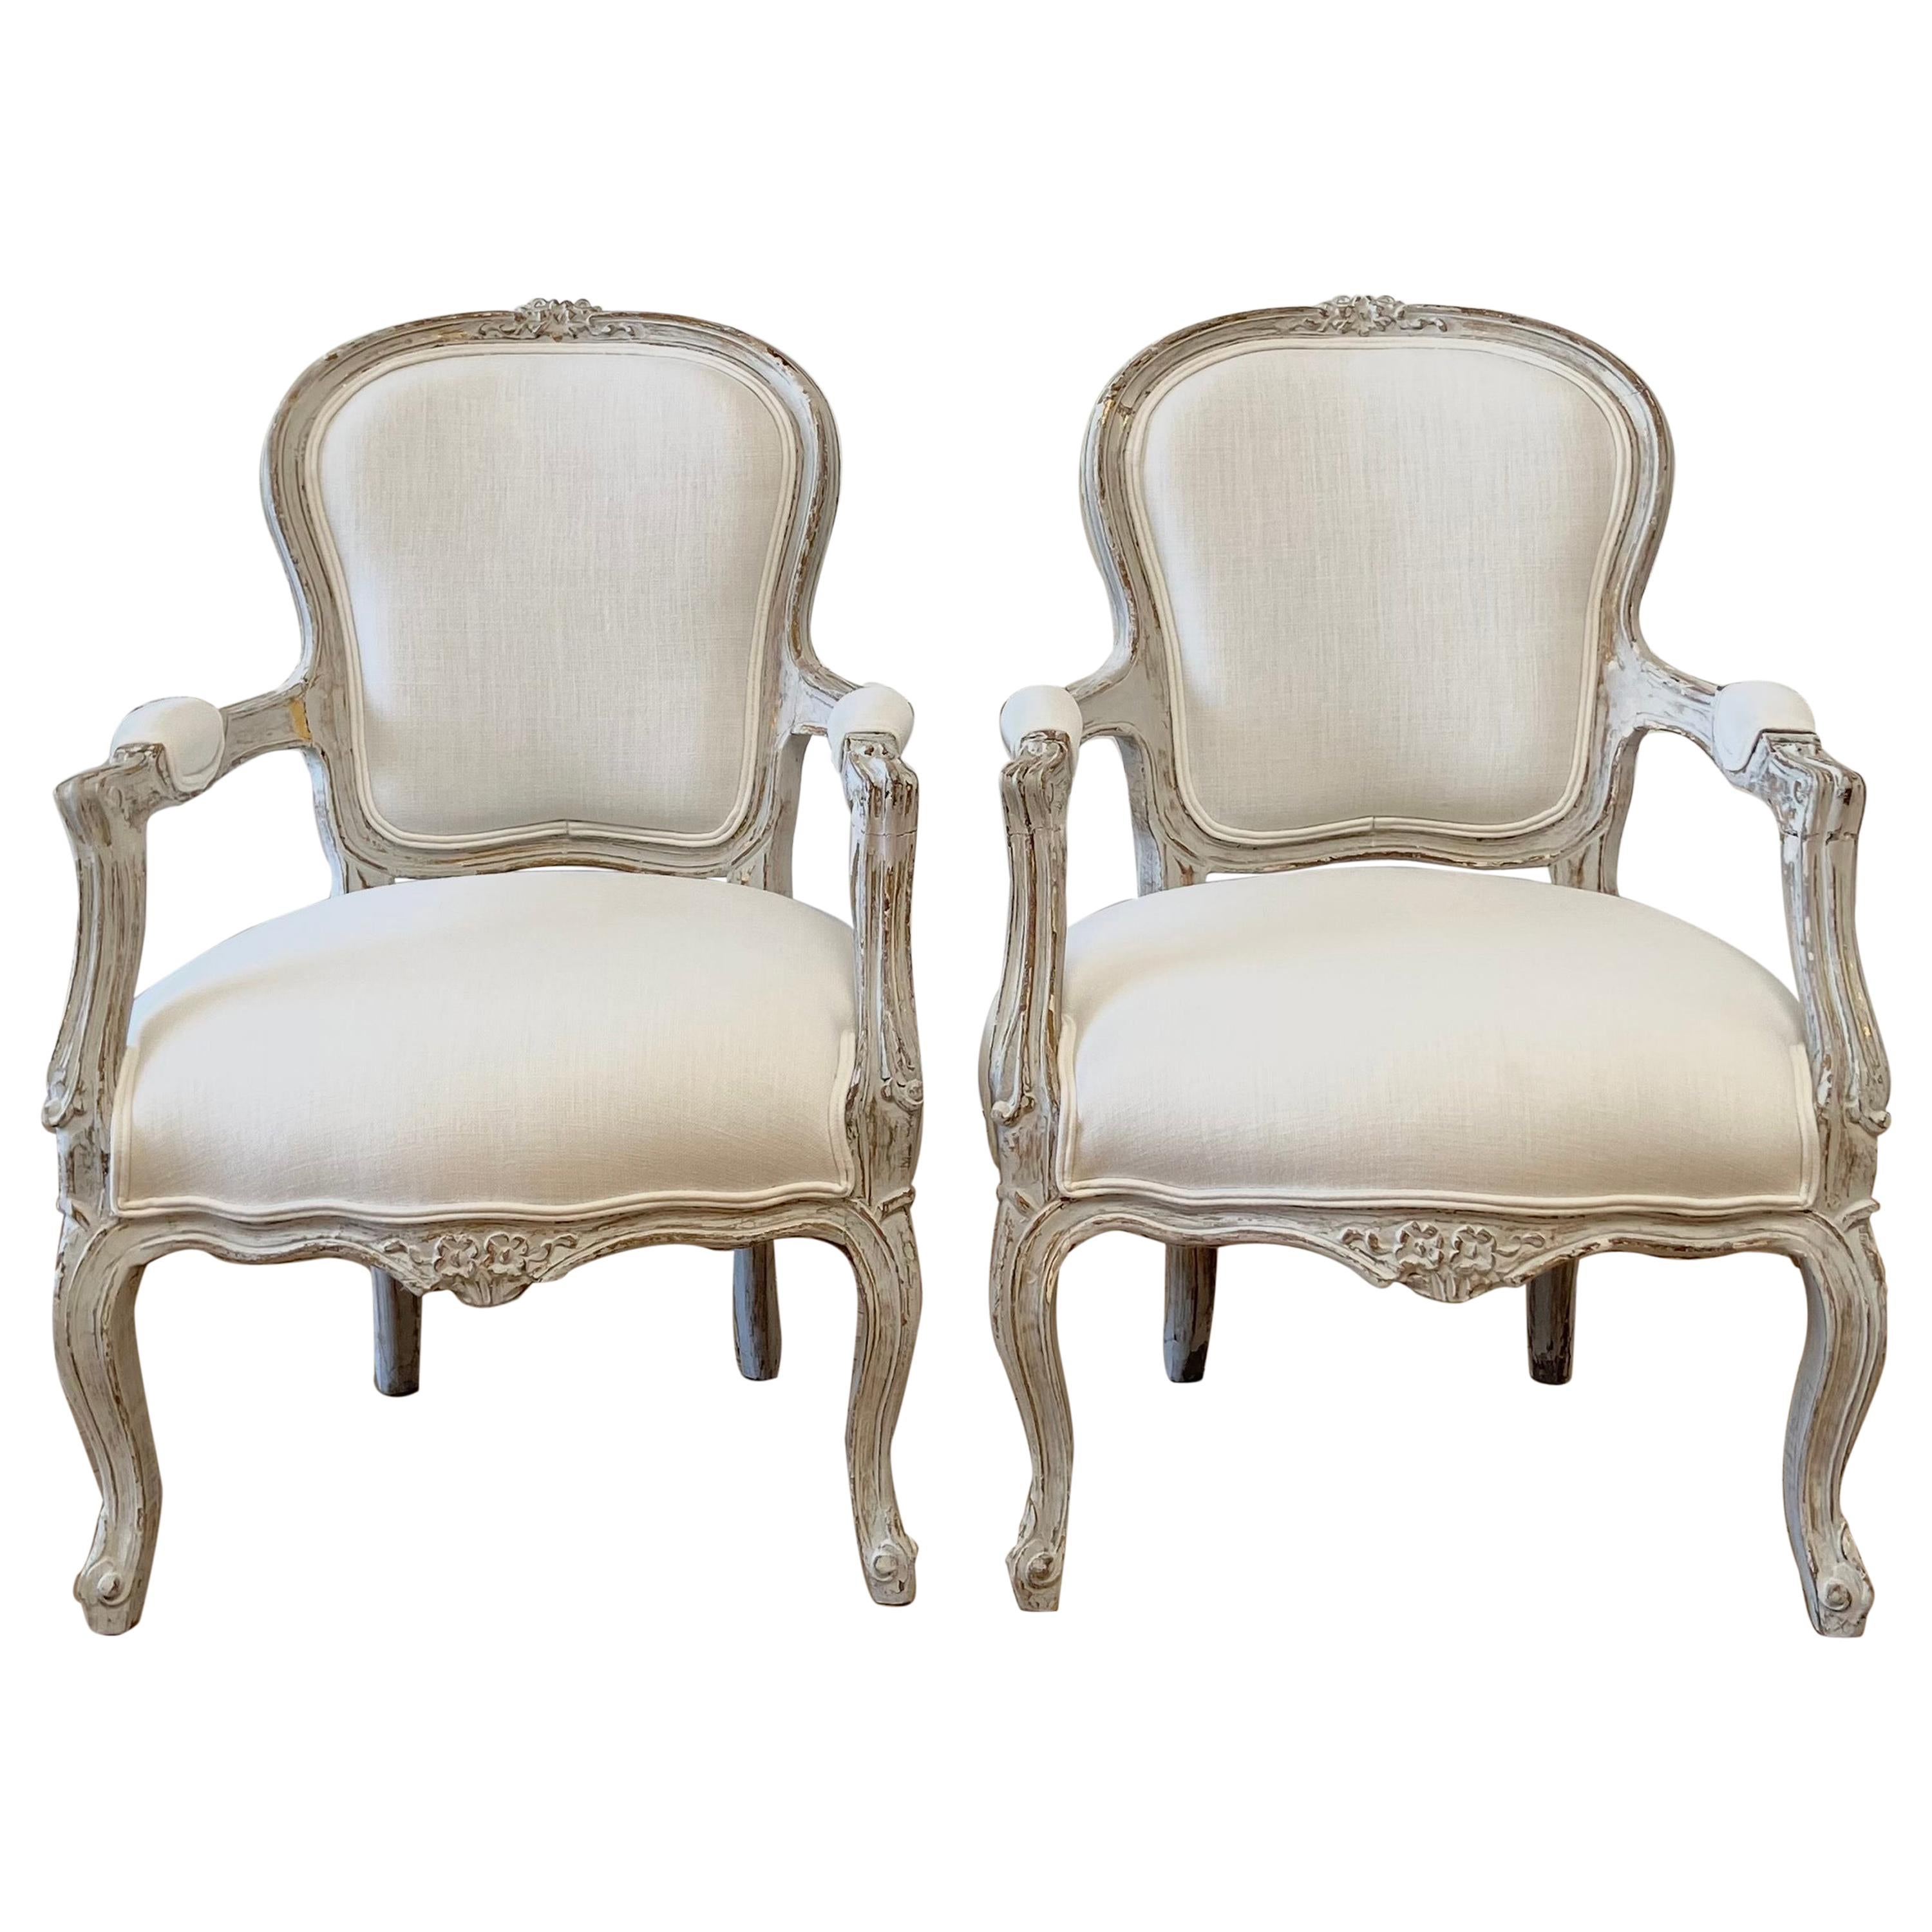 Vintage Style Louis XV Painted Arm Chairs in White Linen